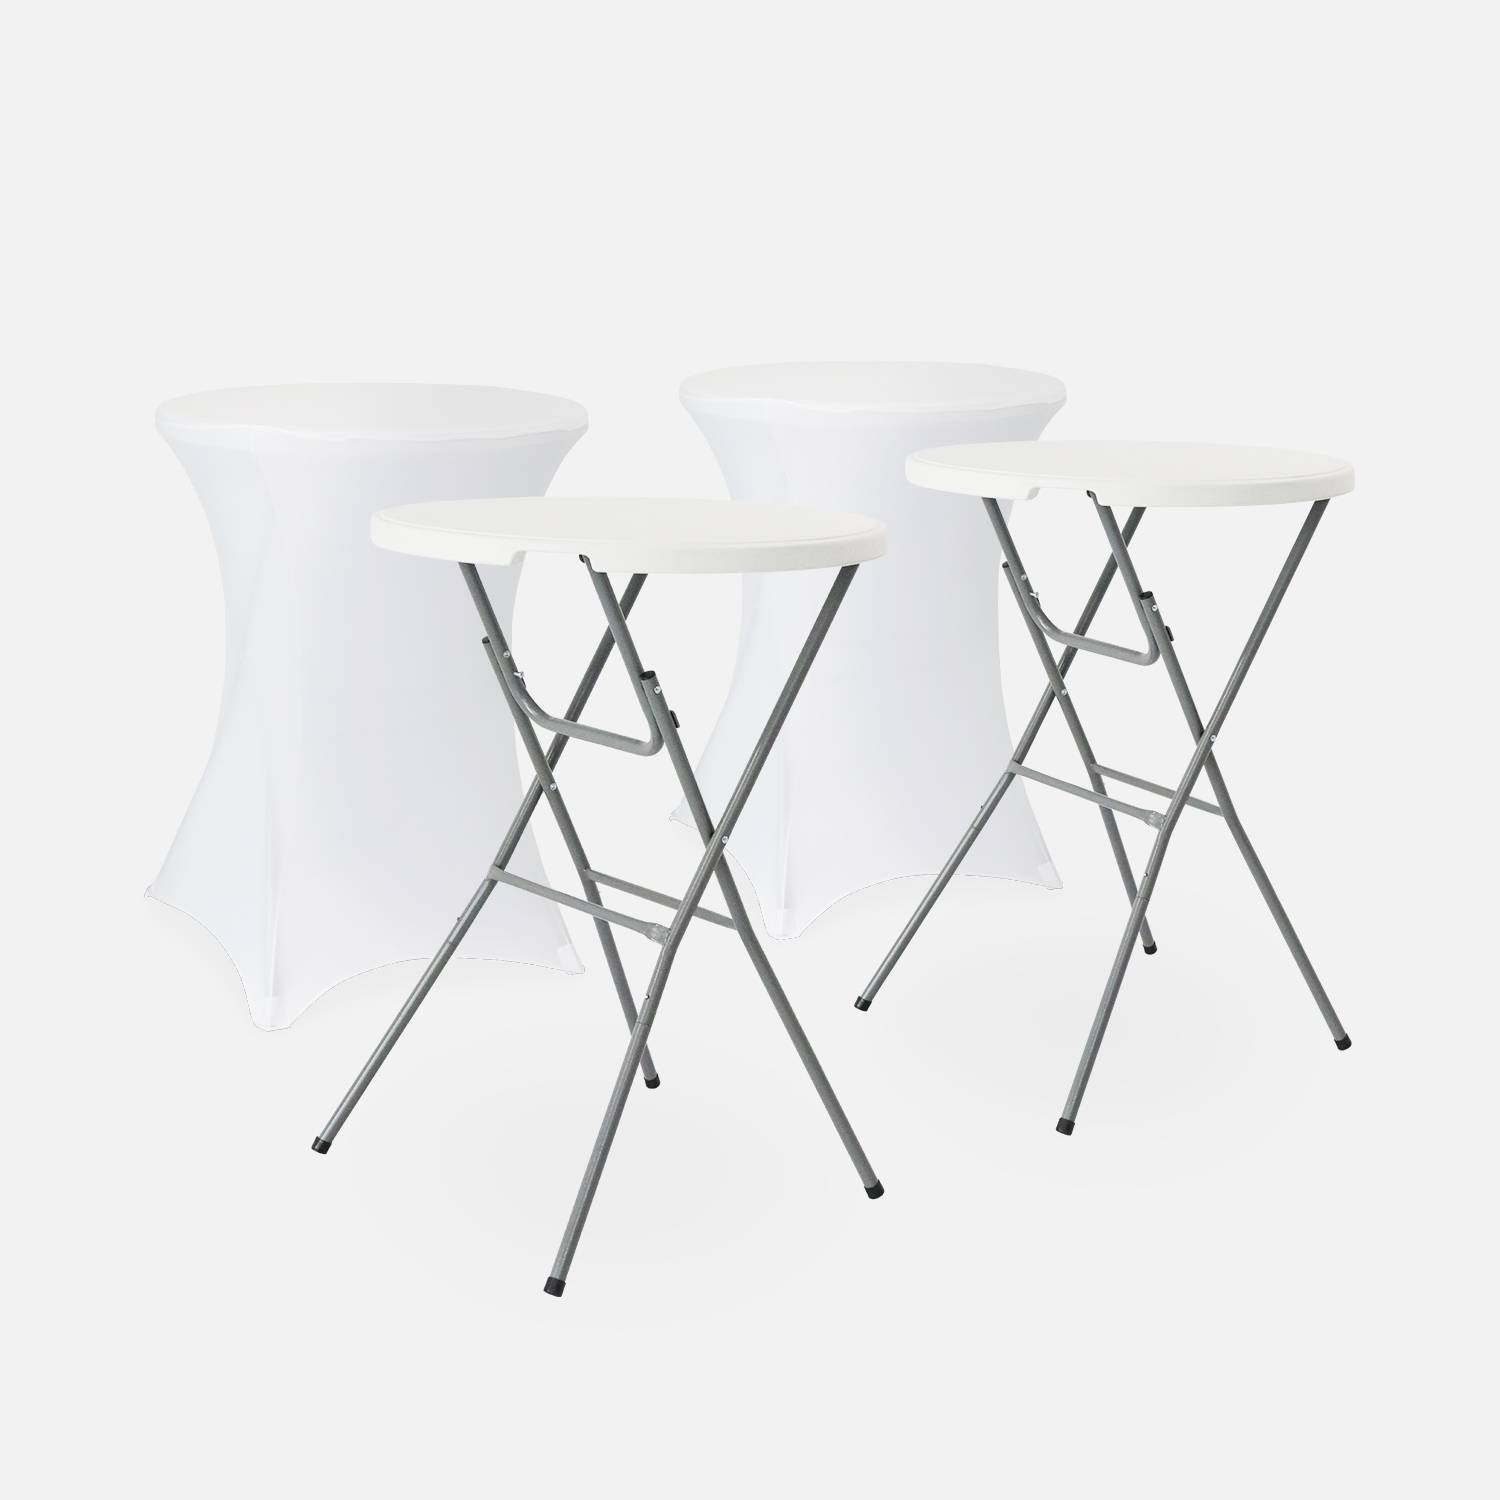 Set of 2 high tables - GALA - Mange debout, foldable, Ø80cm x 110cm + 2 white polyester covers Photo3